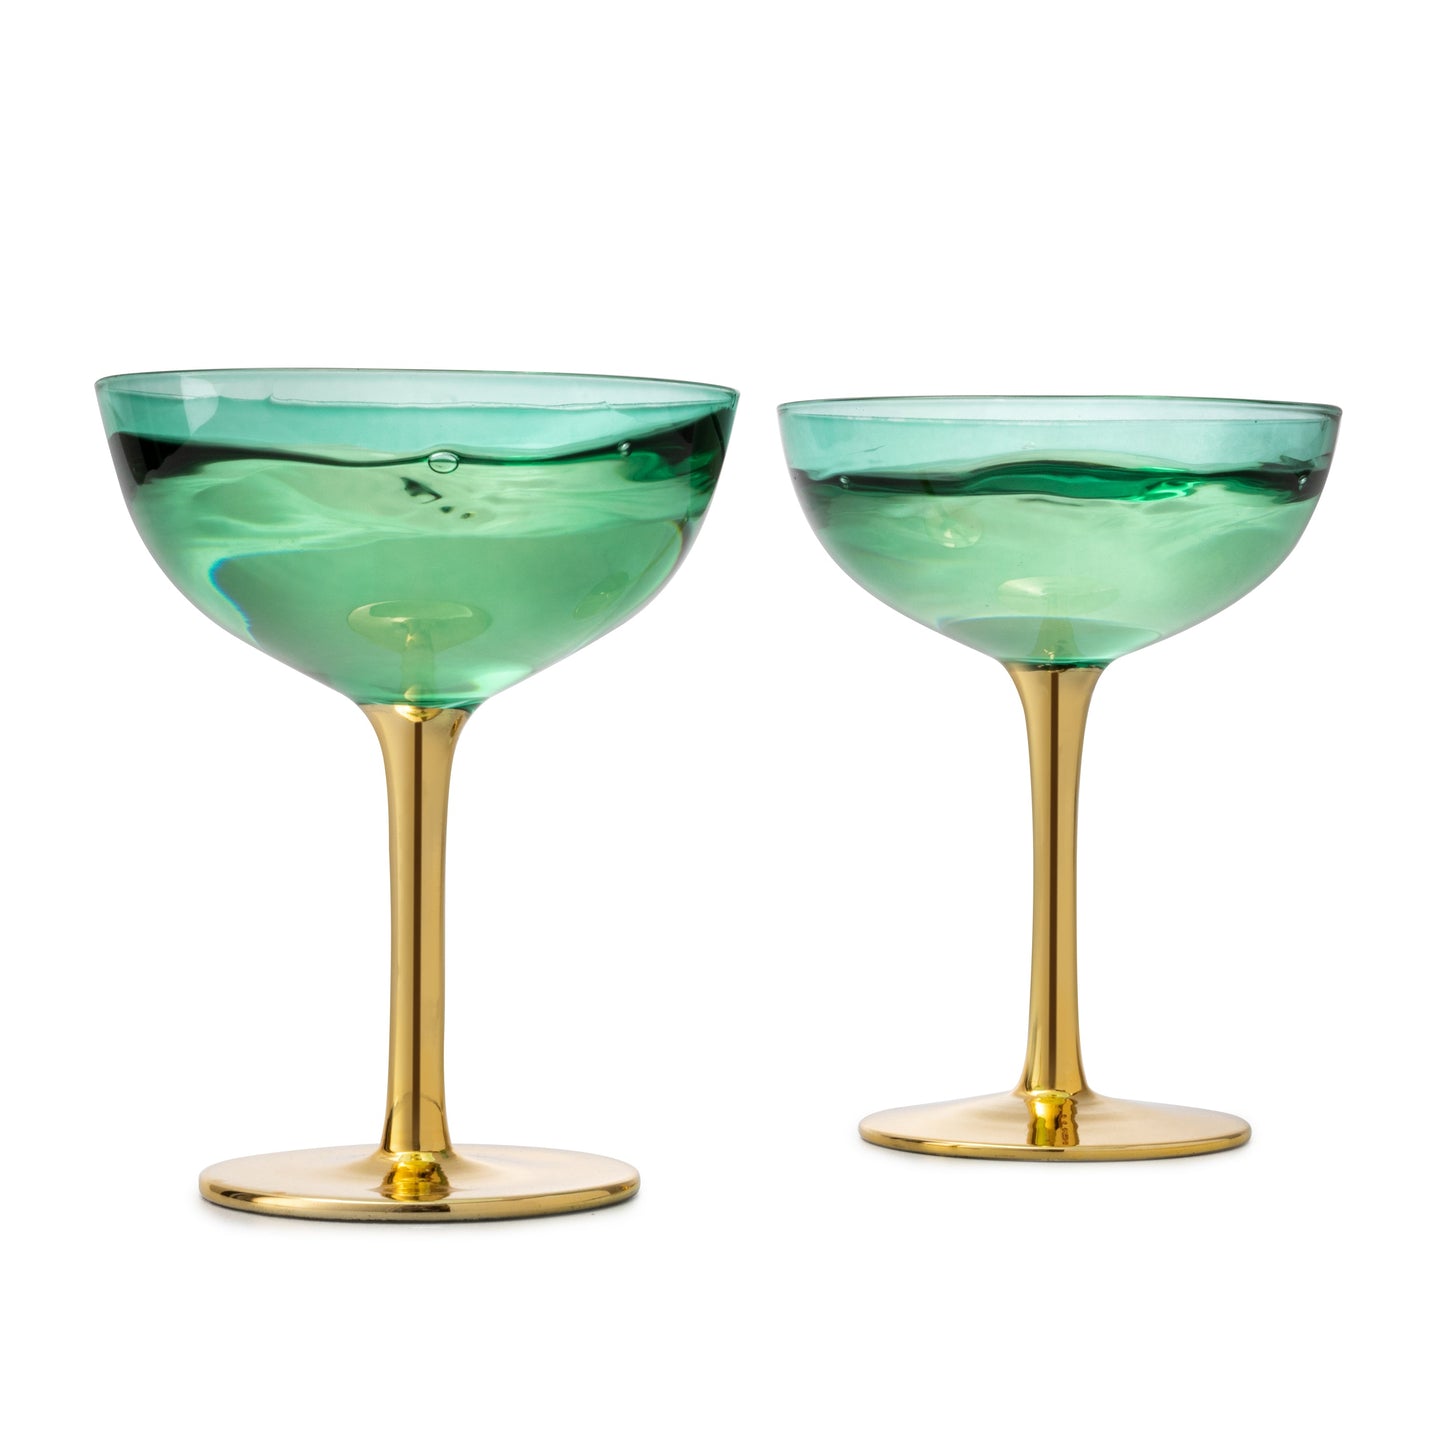 Colored Coupe Art Deco Glasses, Gold | Set of 2 | 12 oz Classic Cocktail Glassware for Champagne, Martini, Manhattan, Sidecar, Crystal Speakeasy Style Goblets Stems, Vintage Blue, Teal, Green by The Wine Savant